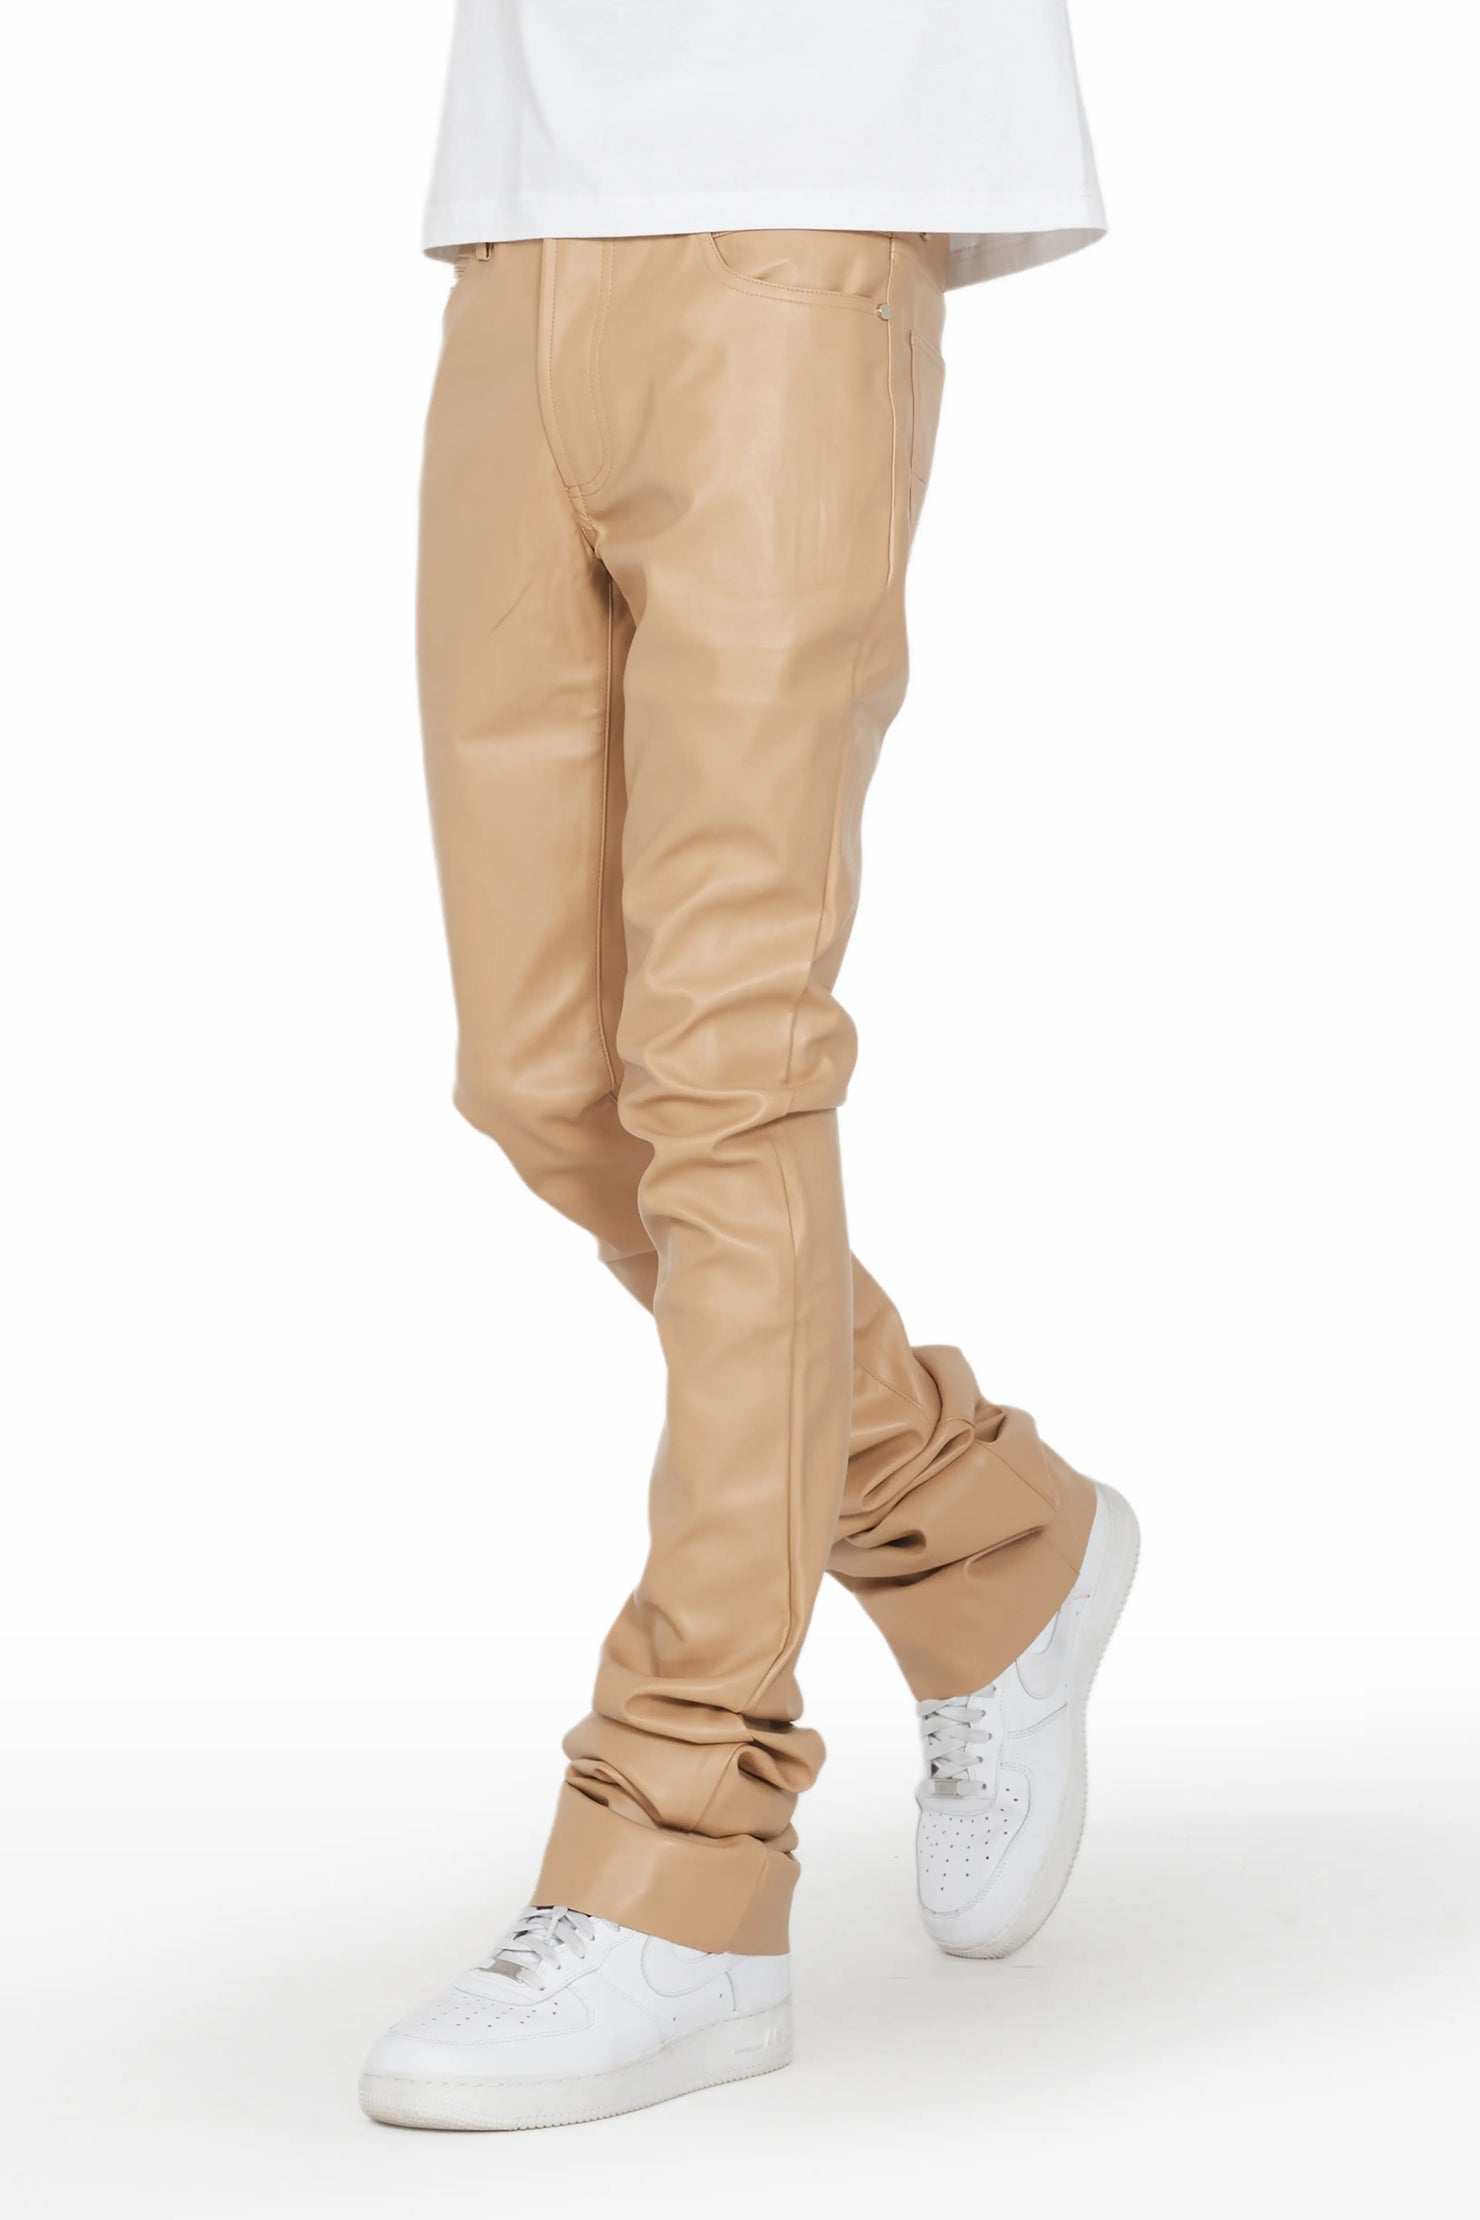 Ricky Tan Super Stacked Faux Leather Pant